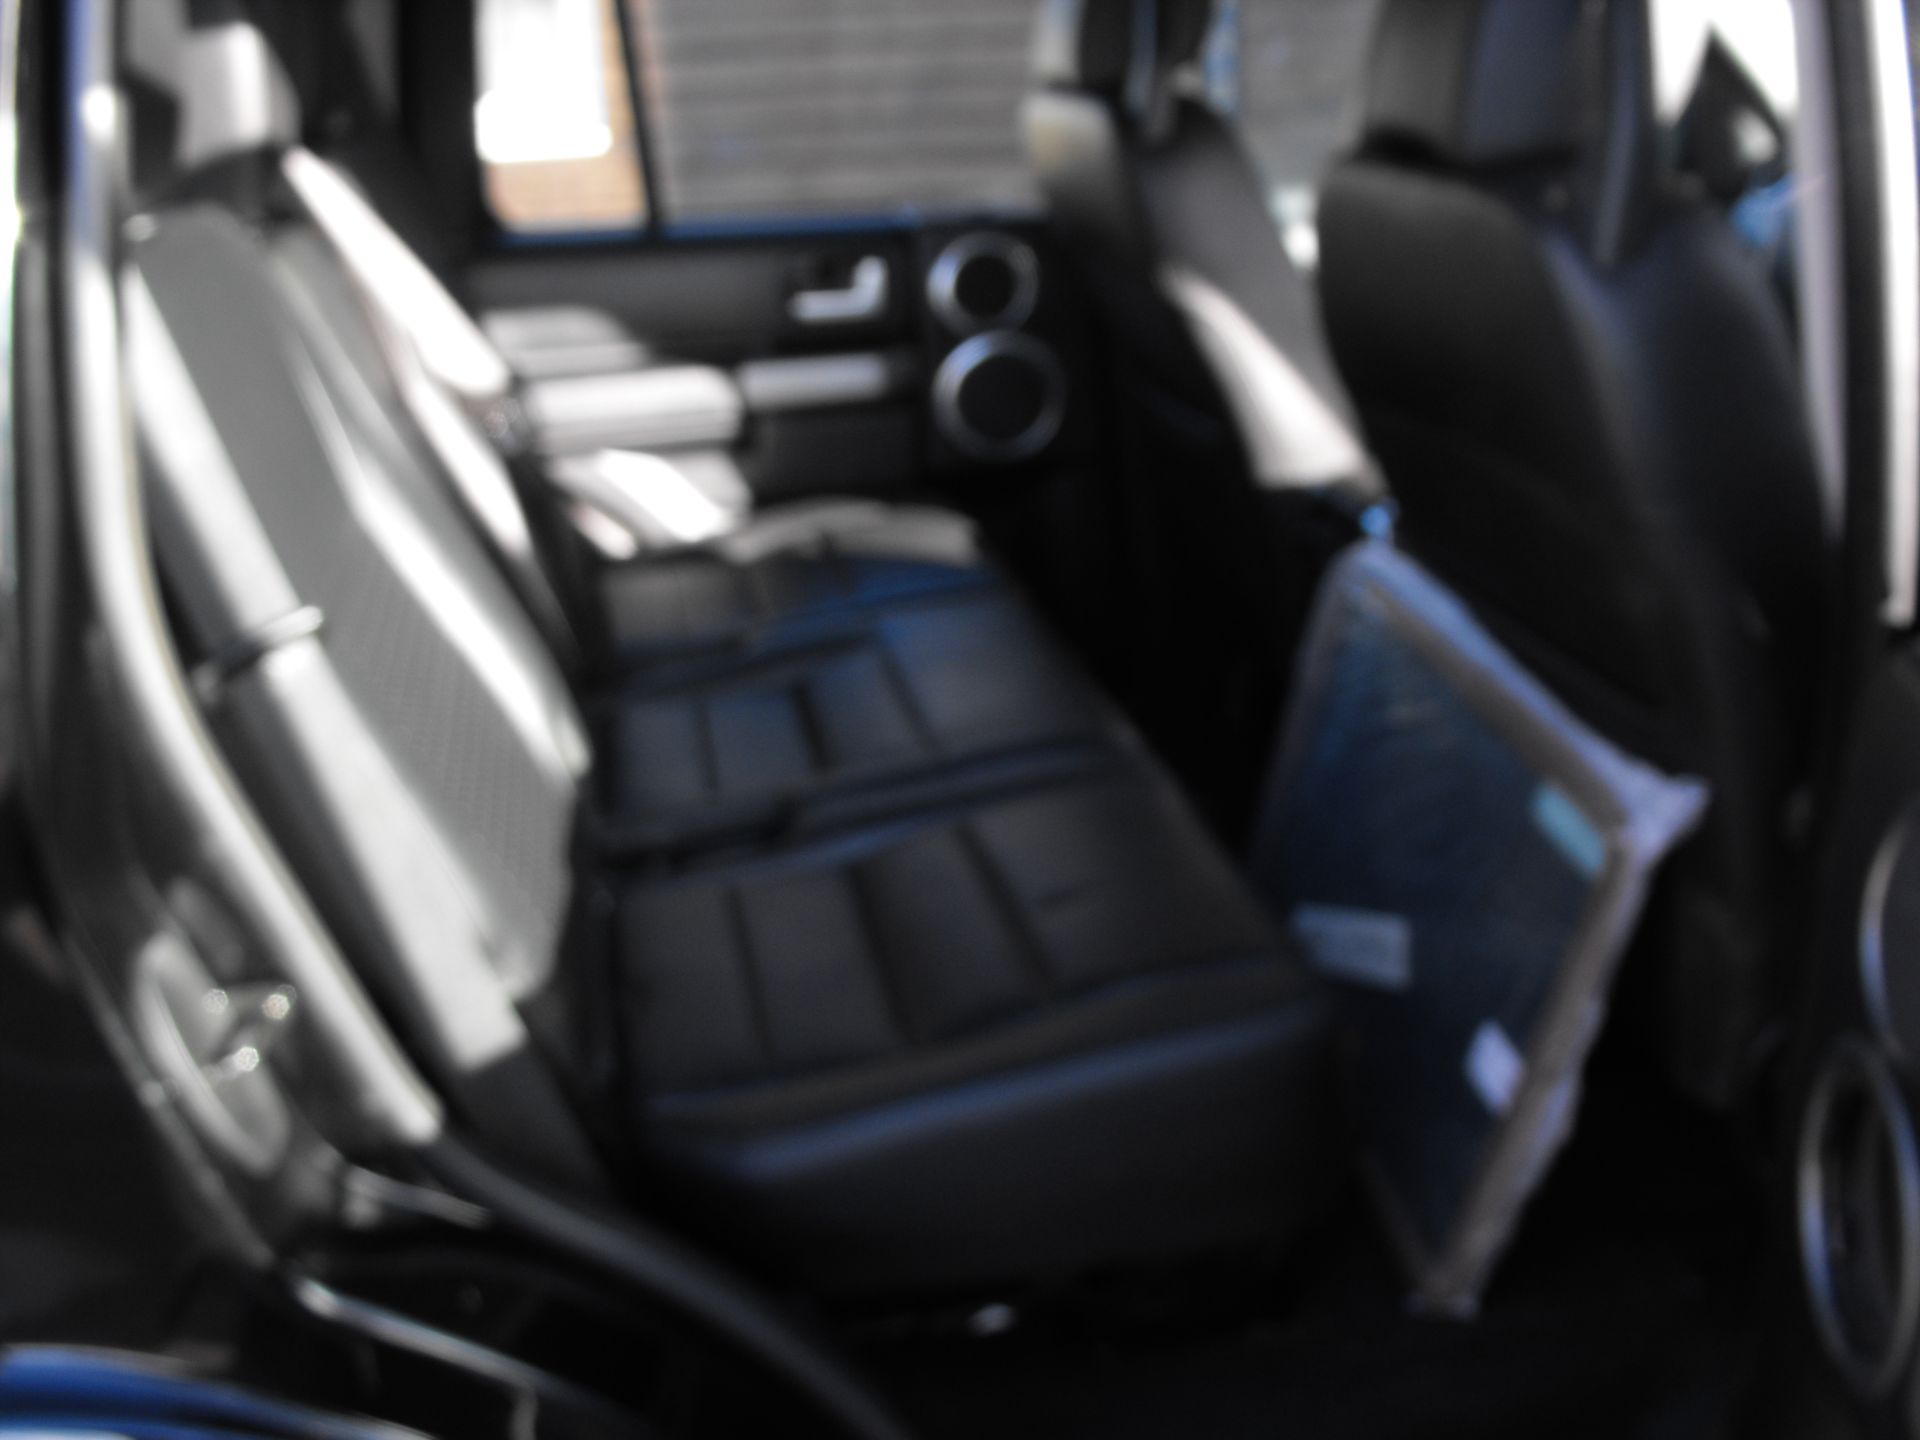 Land Rover Discovery 3 XS TDV6 Auto 2008 - Image 6 of 9